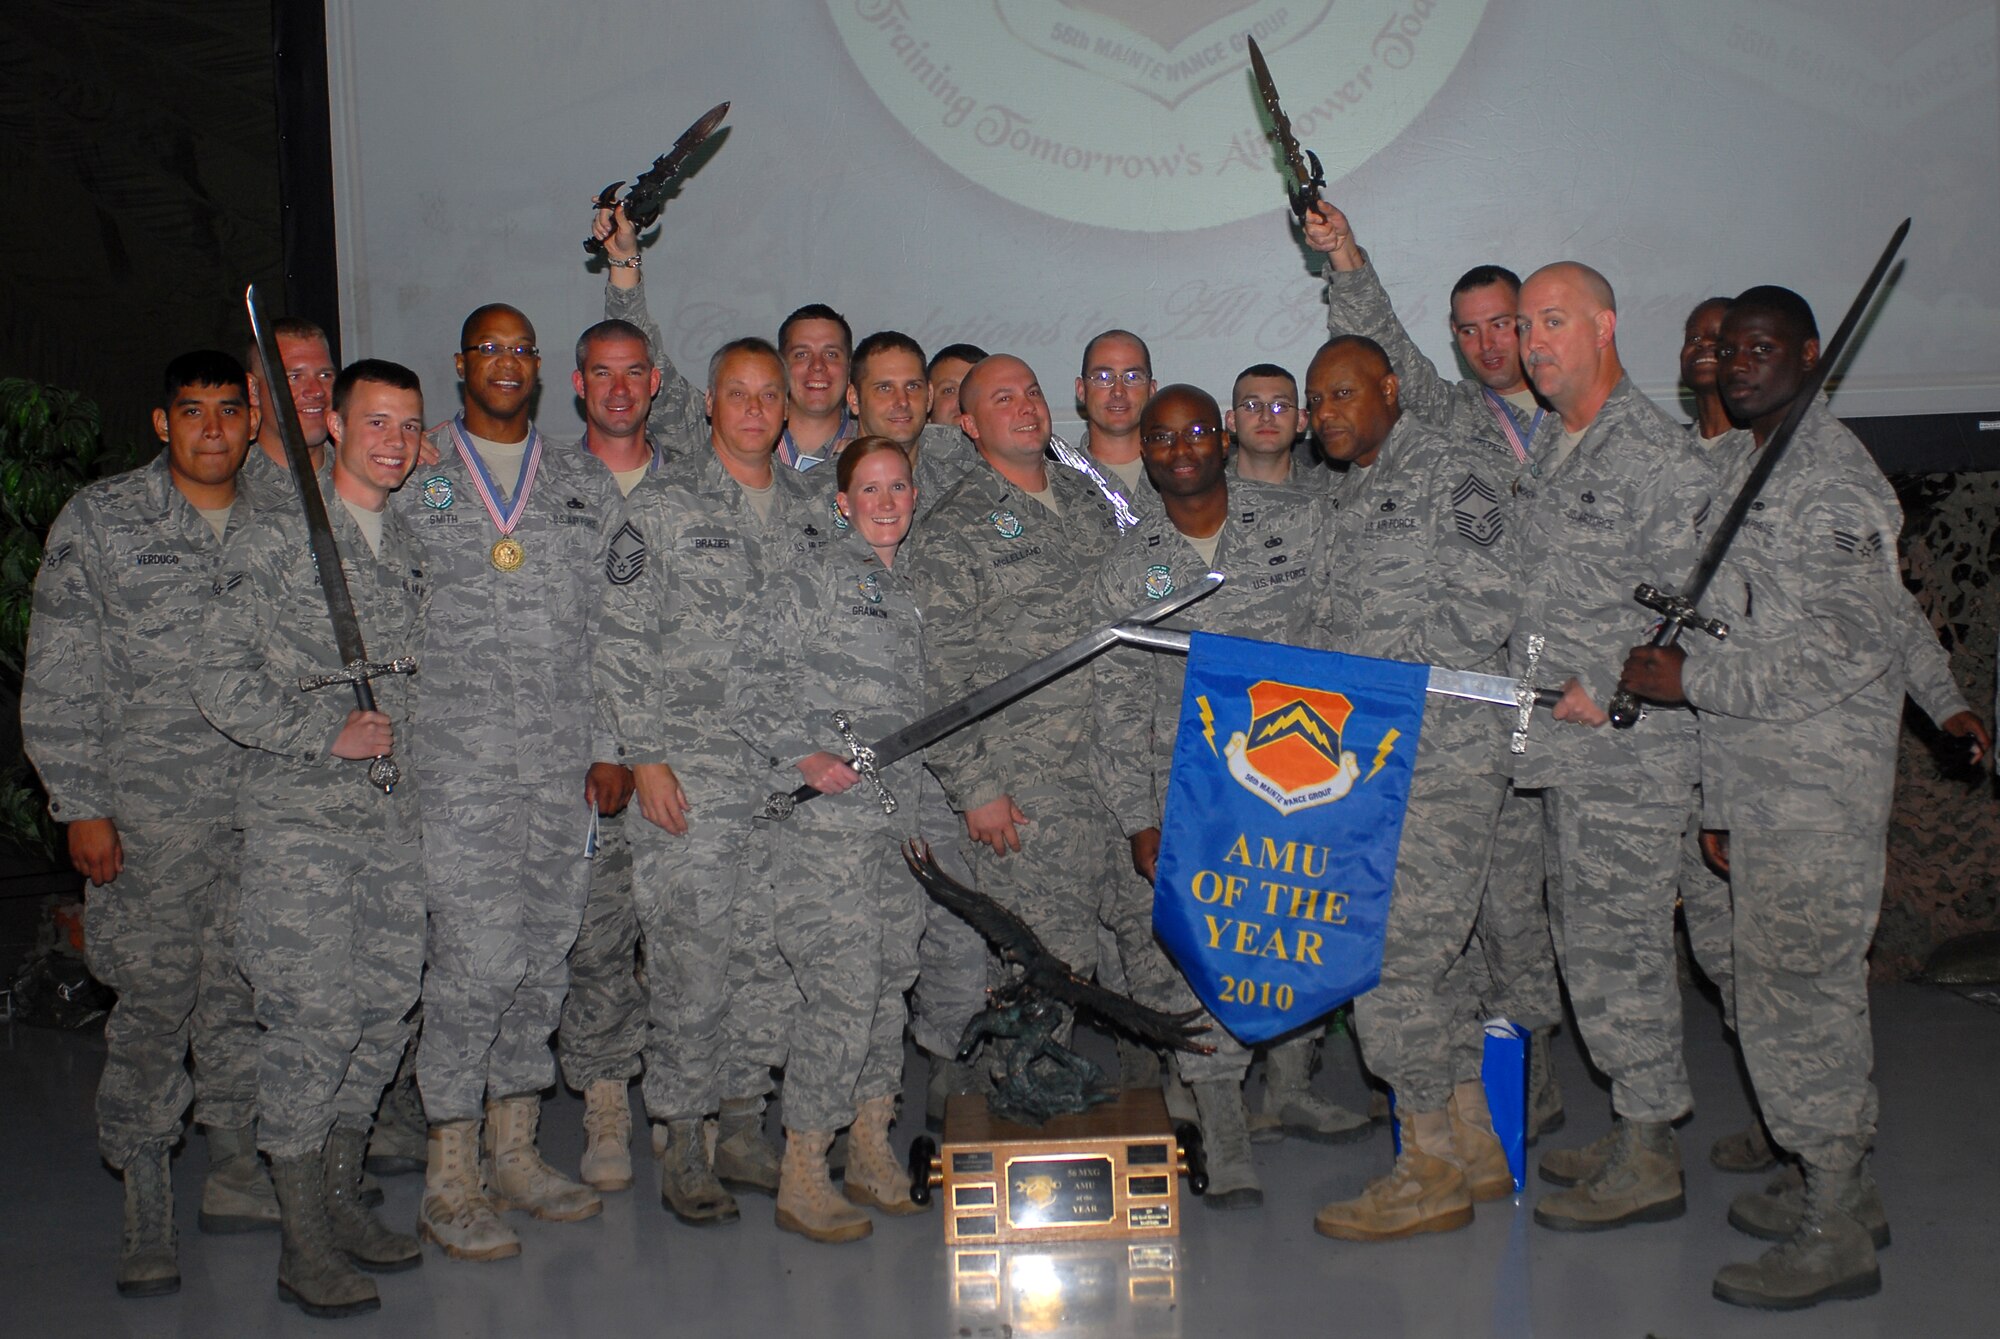 Members of the 308th Aircraft Maintenance Unit pose for a photograph after winning the 56th Maintenance Group AMU of the Year during the maintenance professional of the year banquet.  (U.S. Air Force photo/Senior Airman Tracie Forte)